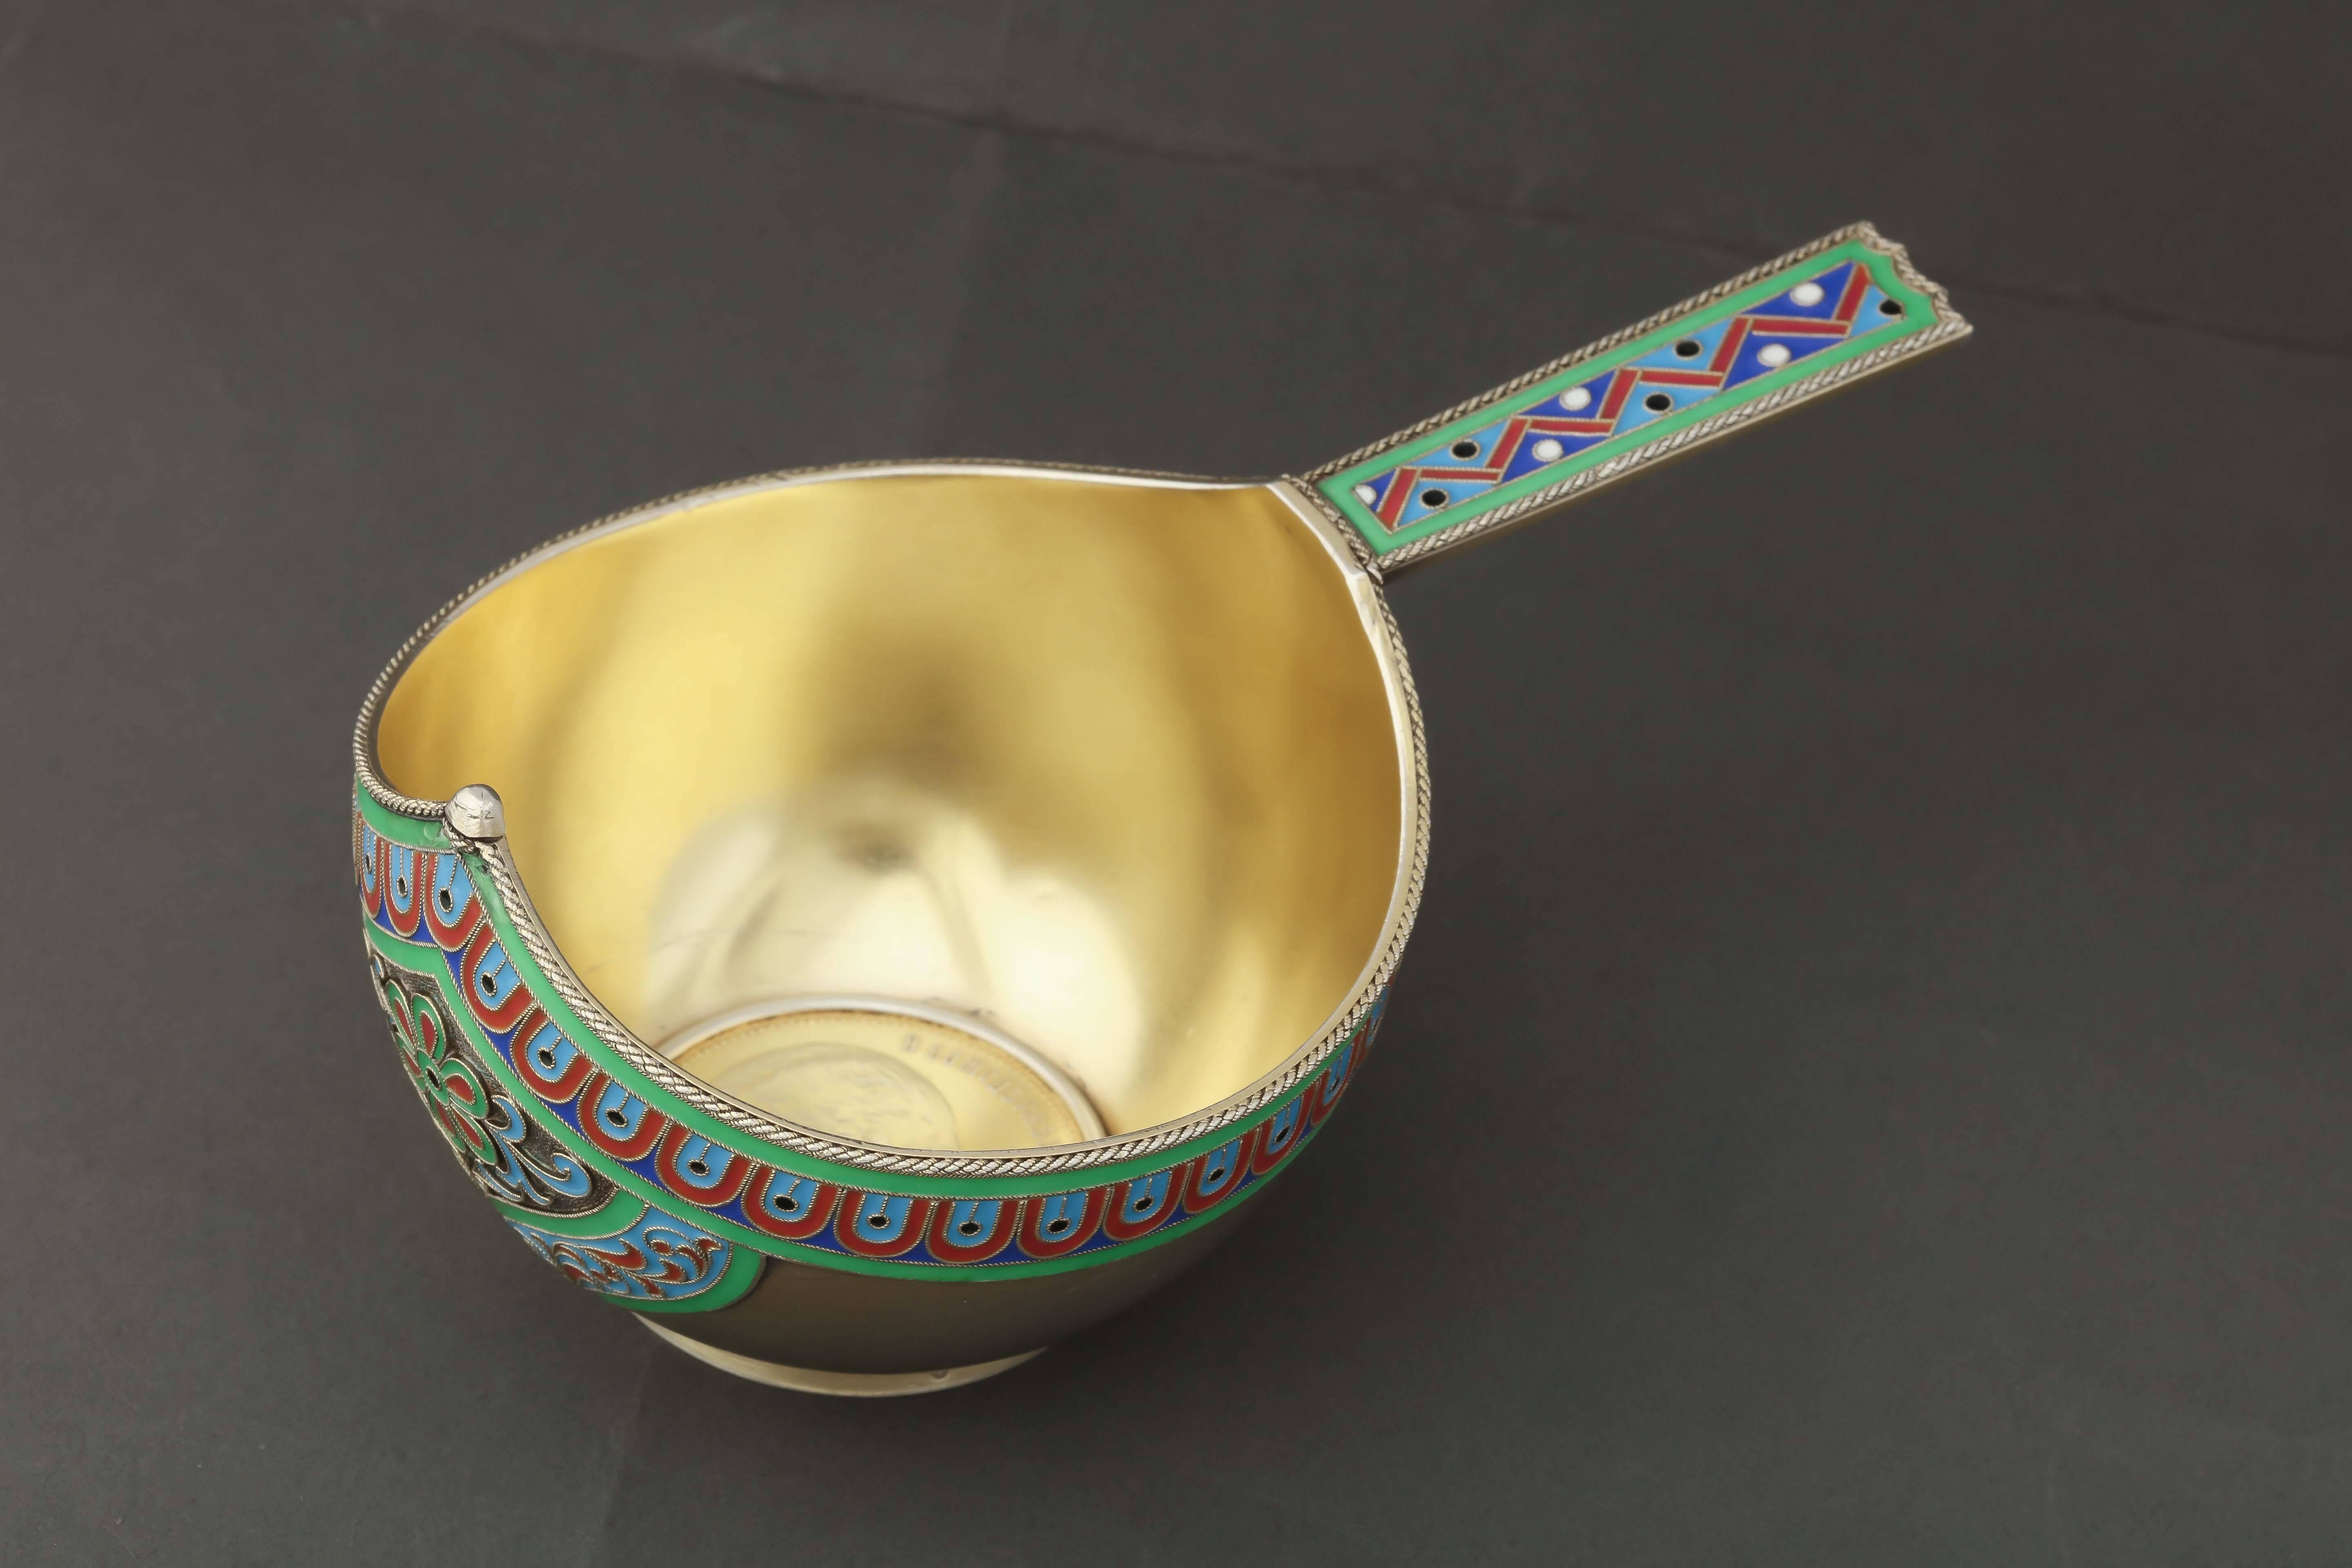 From the Romanov era period of Tsar Nicholas II, a beautiful gilded silver kovsh or traditional Russian bowl, the exterior and handle decorated with vibrant enamel colors in distinctive Old Russian entrelac design unique to Grachev of St.